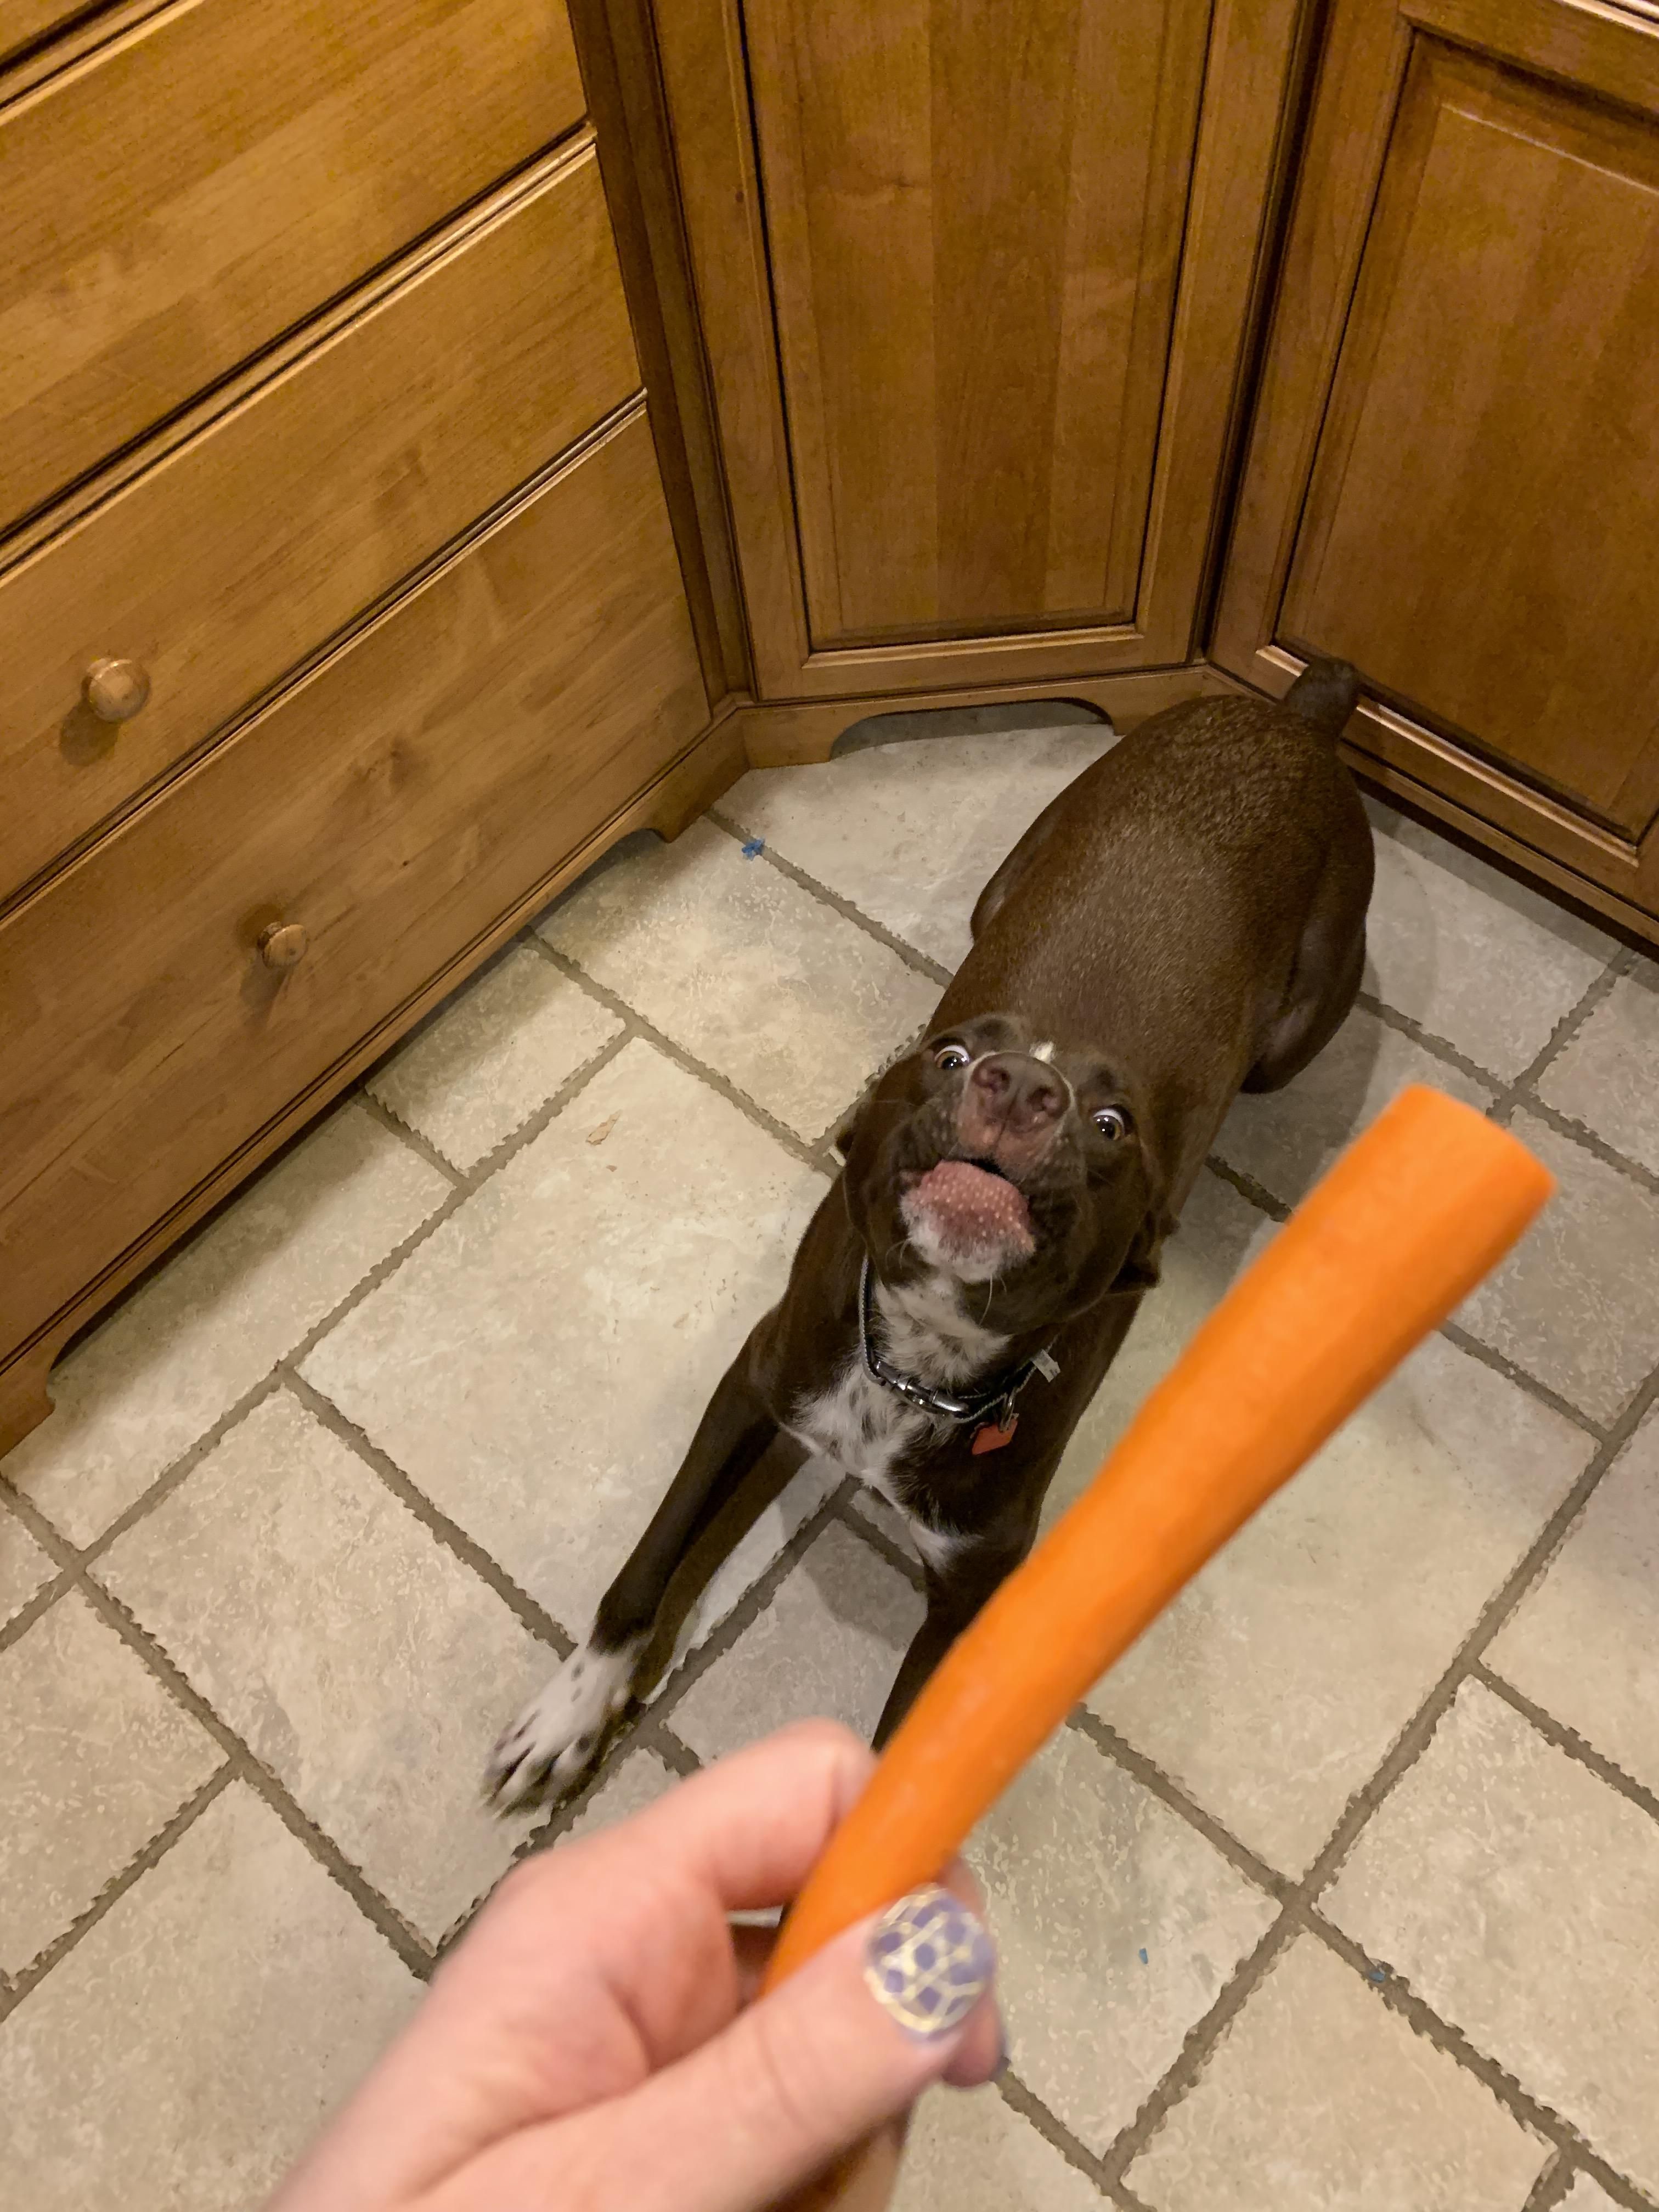 So...I recently discovered my dog likes carrots.